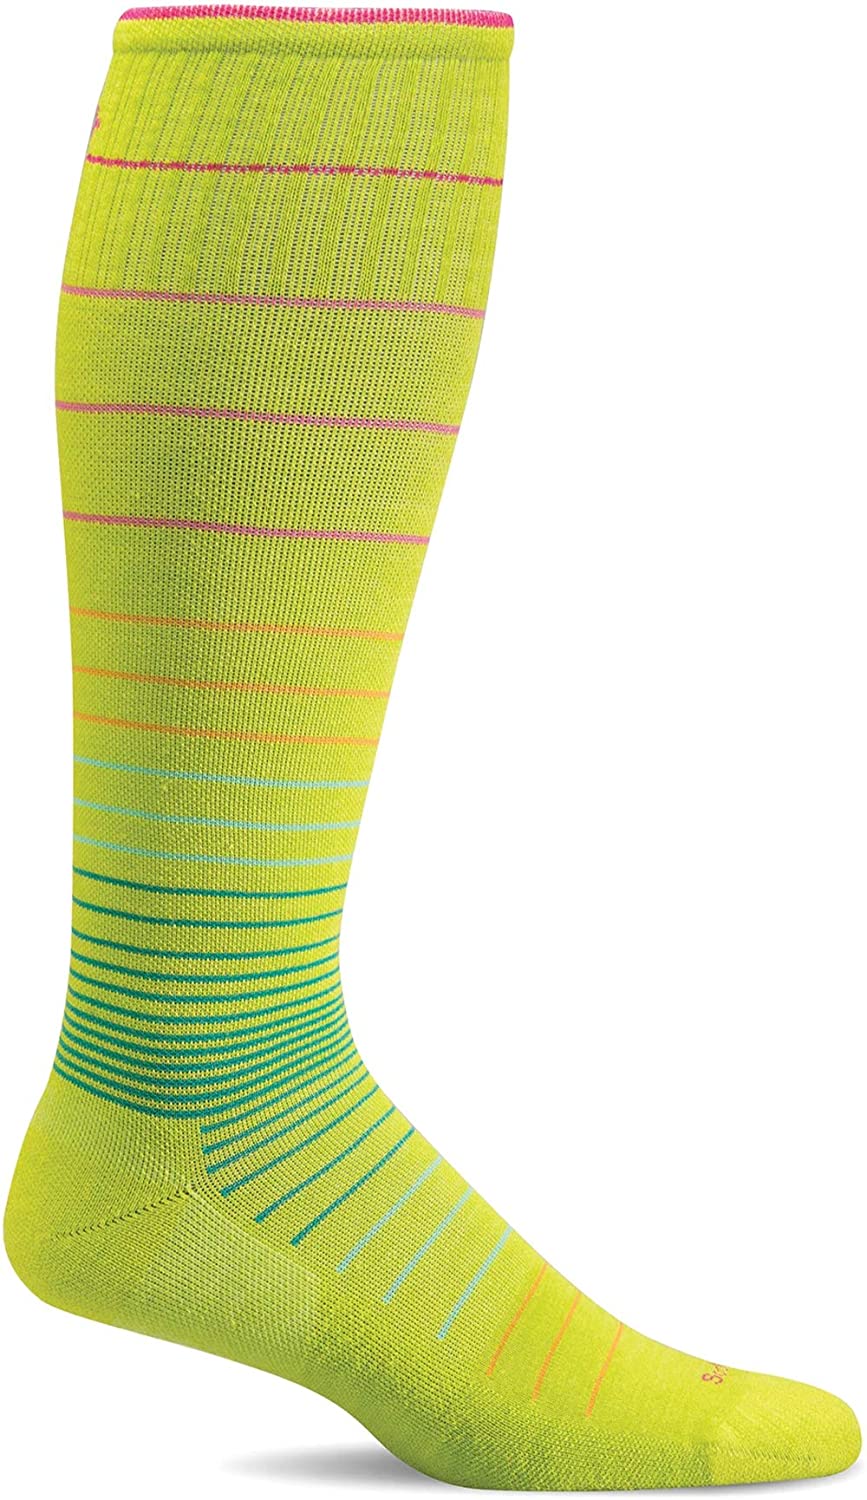 Sockwell Women's Circulator Moderate Graduated Compression Sock in Limelight from the side